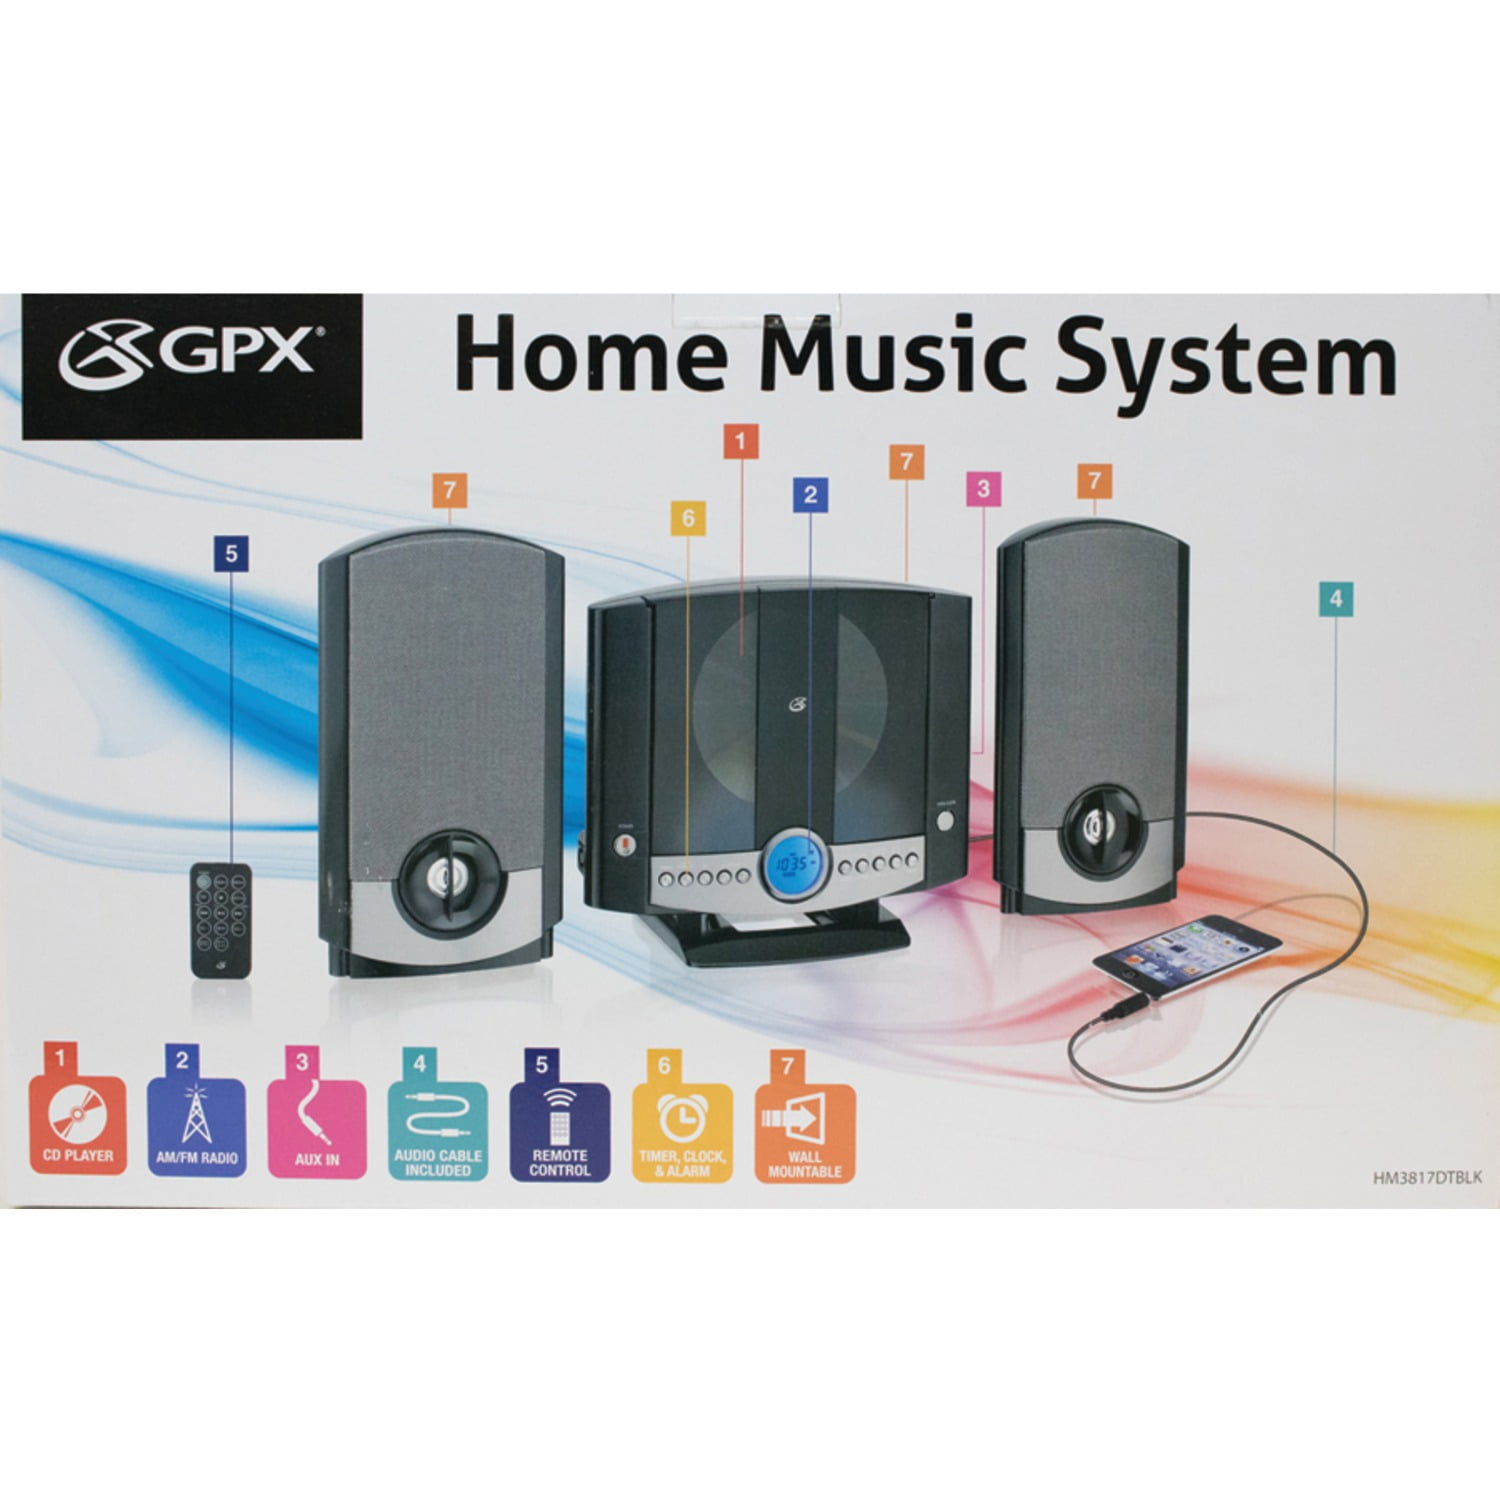 Renewed GPX HM3817DTBK Home Music System with Remote and AM/FM Radio 